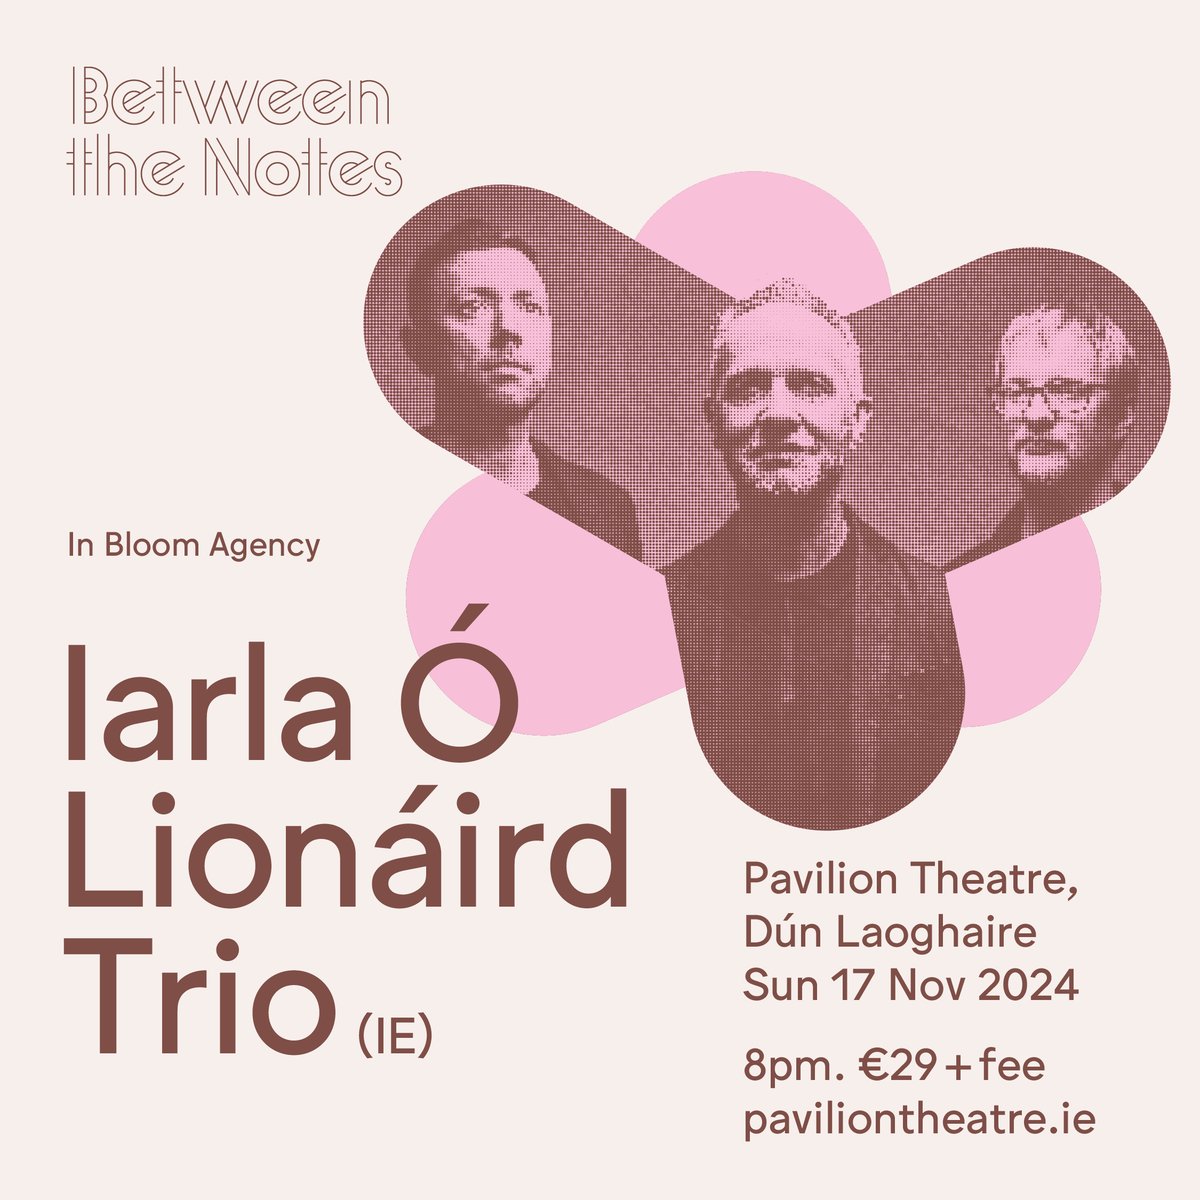 🎙️ ON SALE NOW: Iarla Ó Lionáird Trio as part of #BetweenTheNotes Following last year’s stunning sold-out show Grammy-nominated @iarlavox returns to Pavilion Theatre with pianist/composer Cormac McCarthy & clarinet maestro Matthew Berrill Sun 17 Nov, 8pm tinyurl.com/IarlaBTN